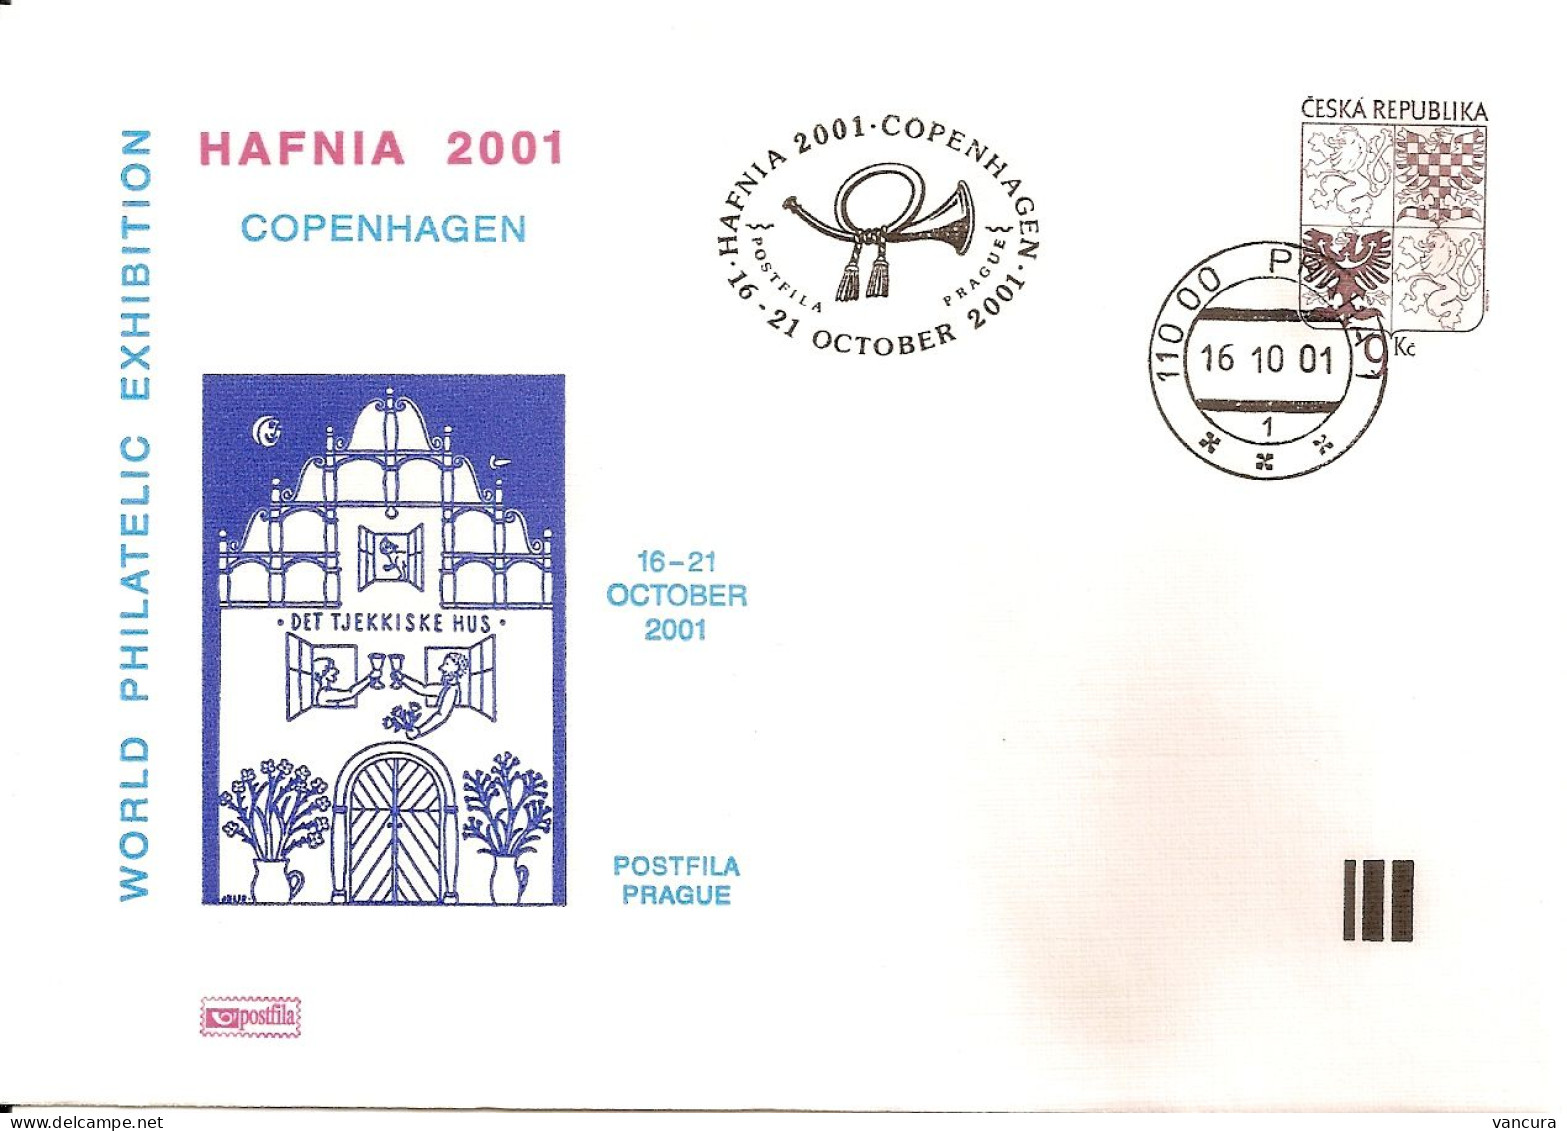 COB A 75 Czech Republic Hafnia Stamp Exhibition 2001 NOTICE POOR SCAN, BUT THE COVER IS FINE! - Briefe